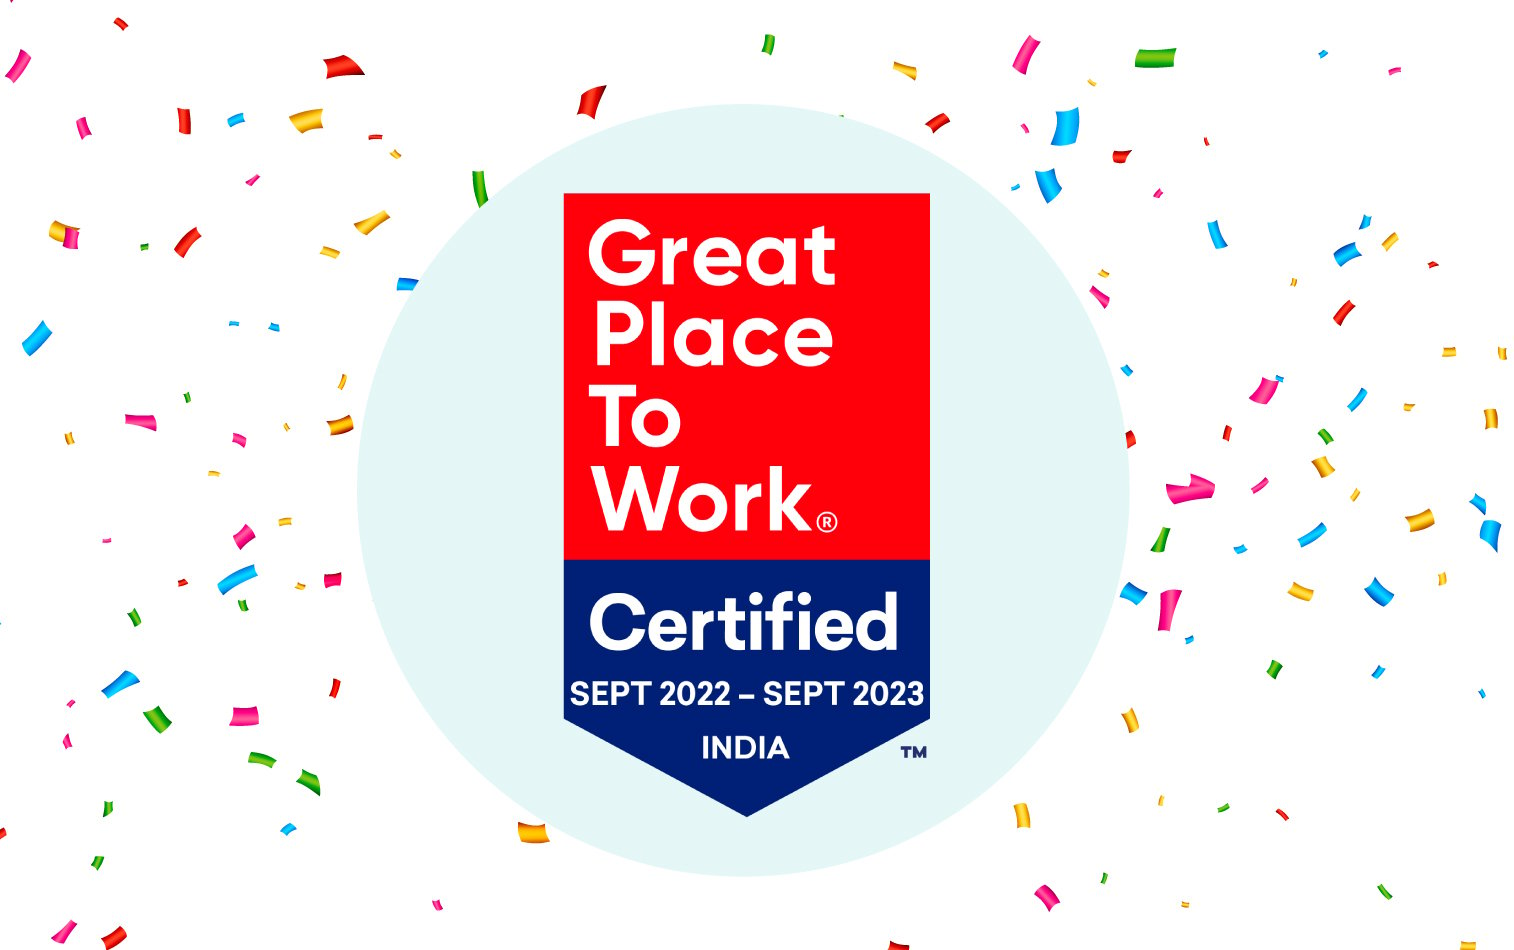 Srijan Is A Certified Great Place To Work For The 6th Time In A Row